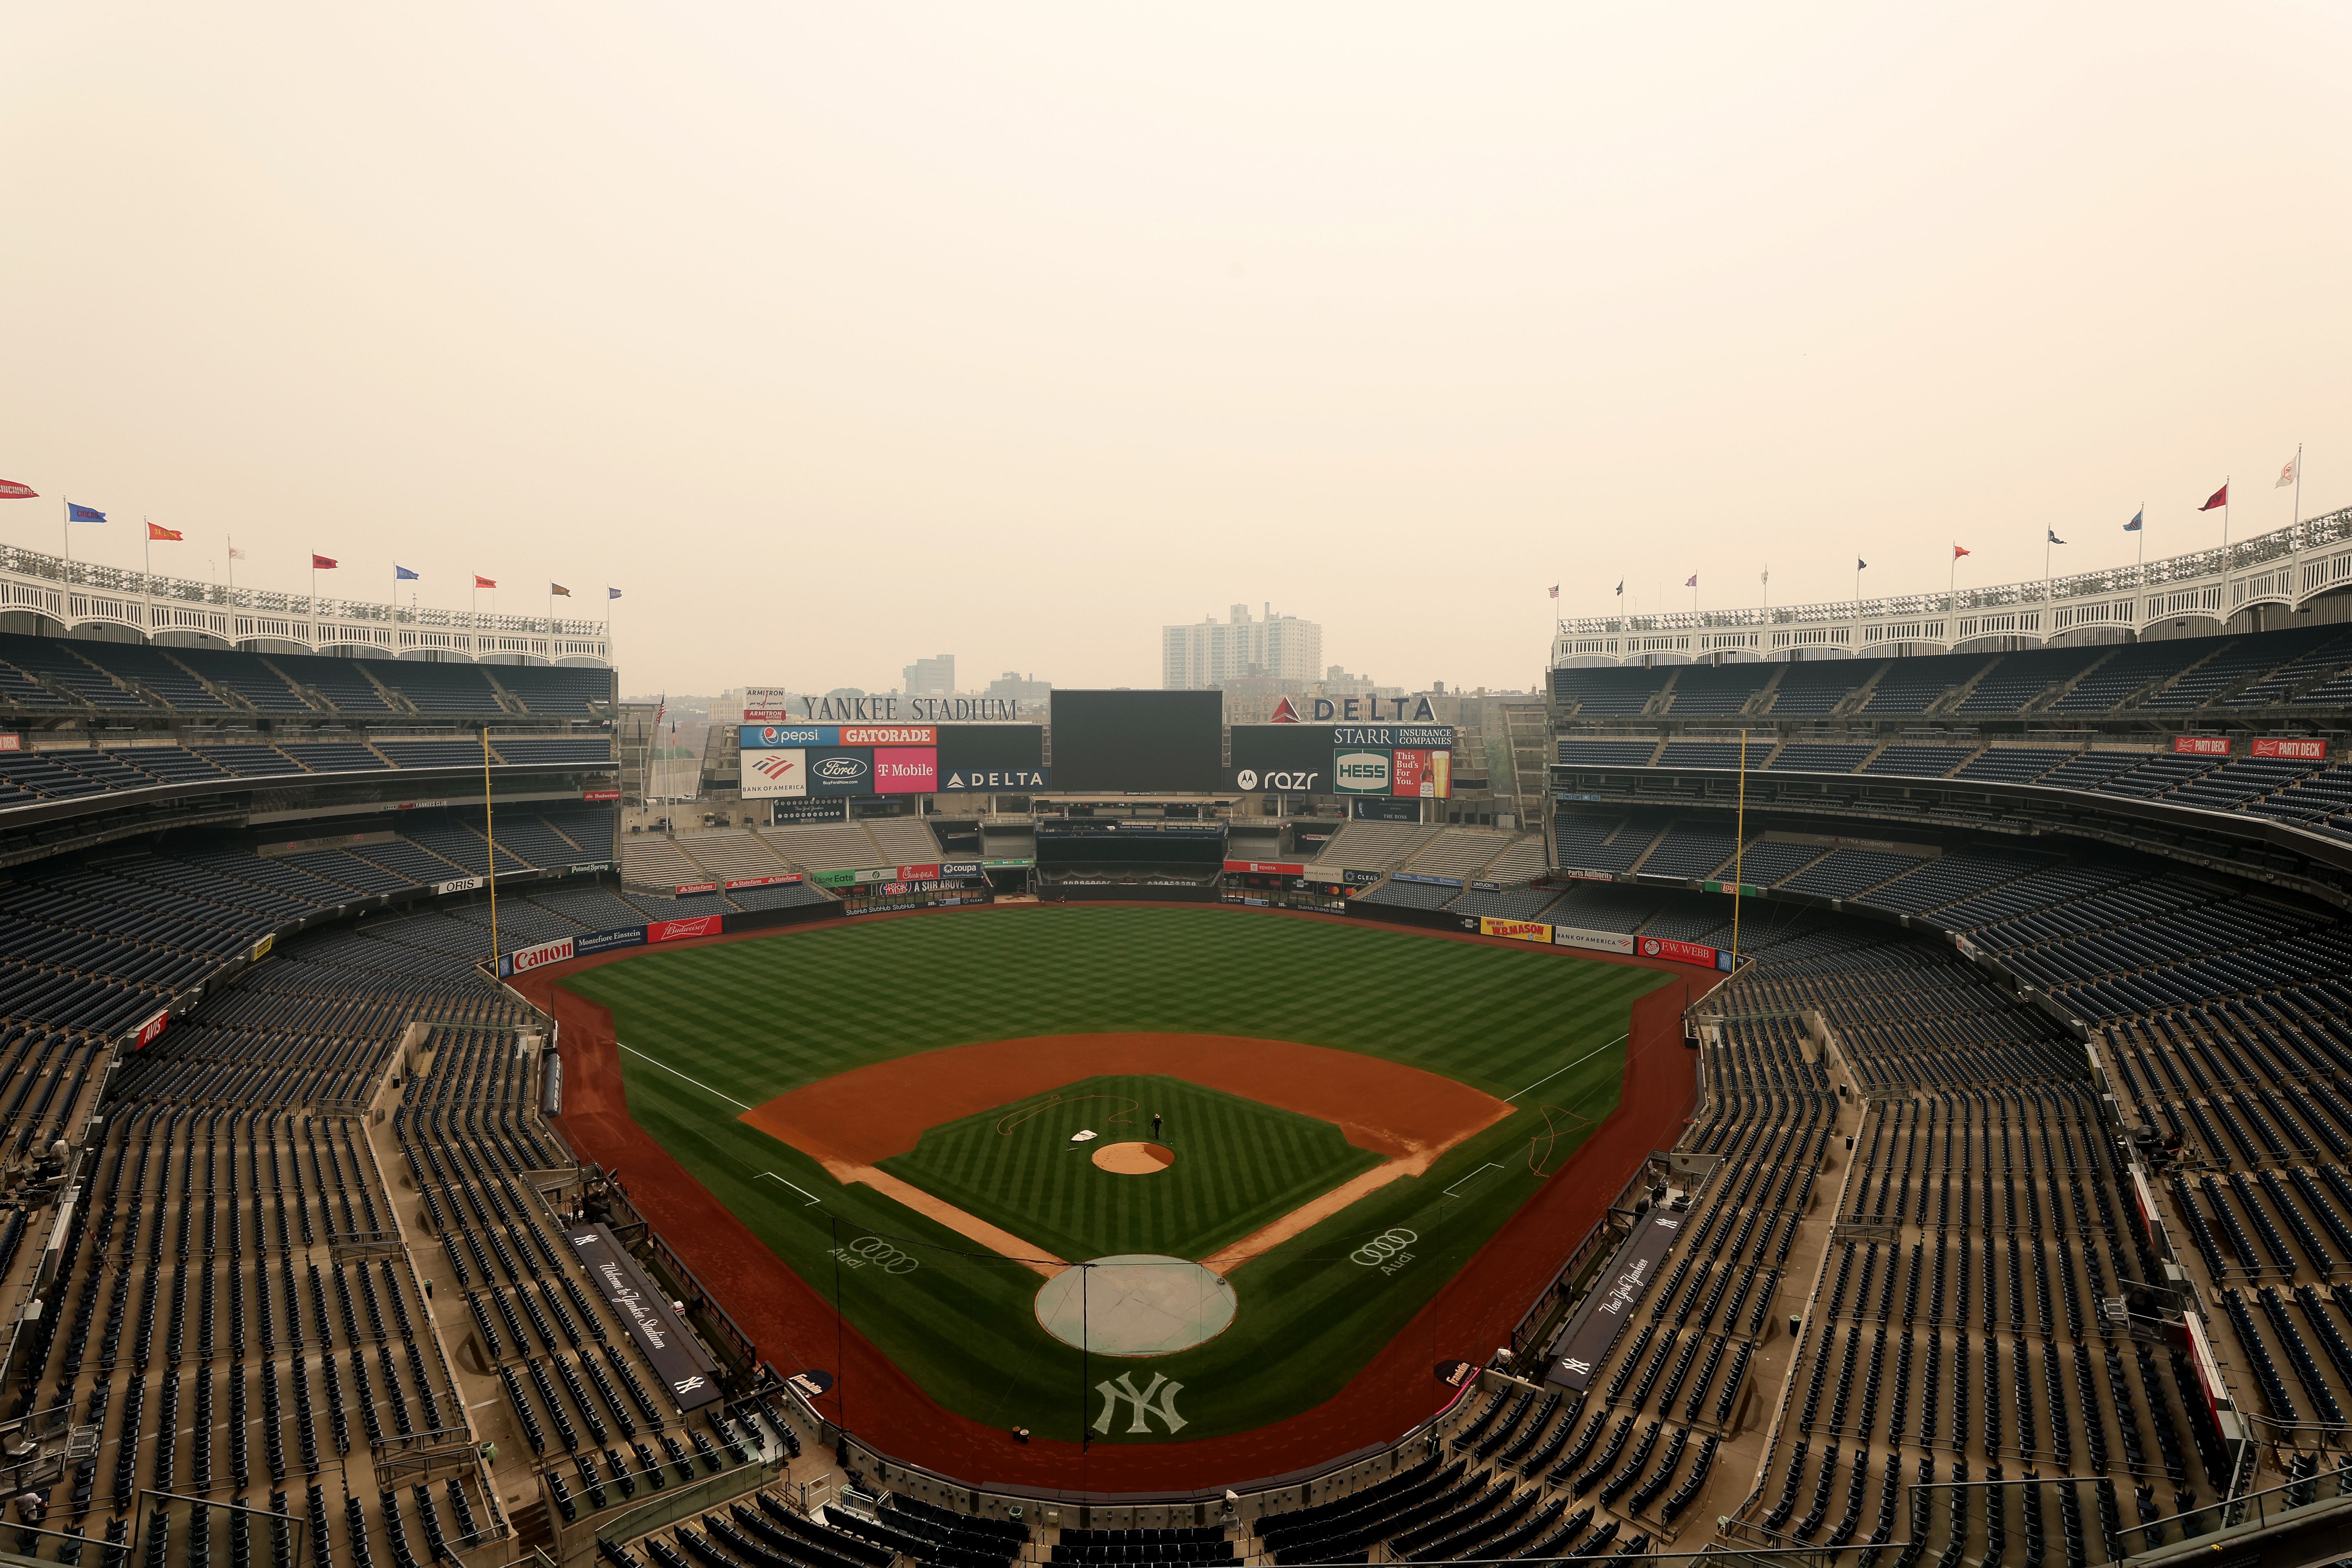 Chicago baseball field is filled with wildfire smoke.